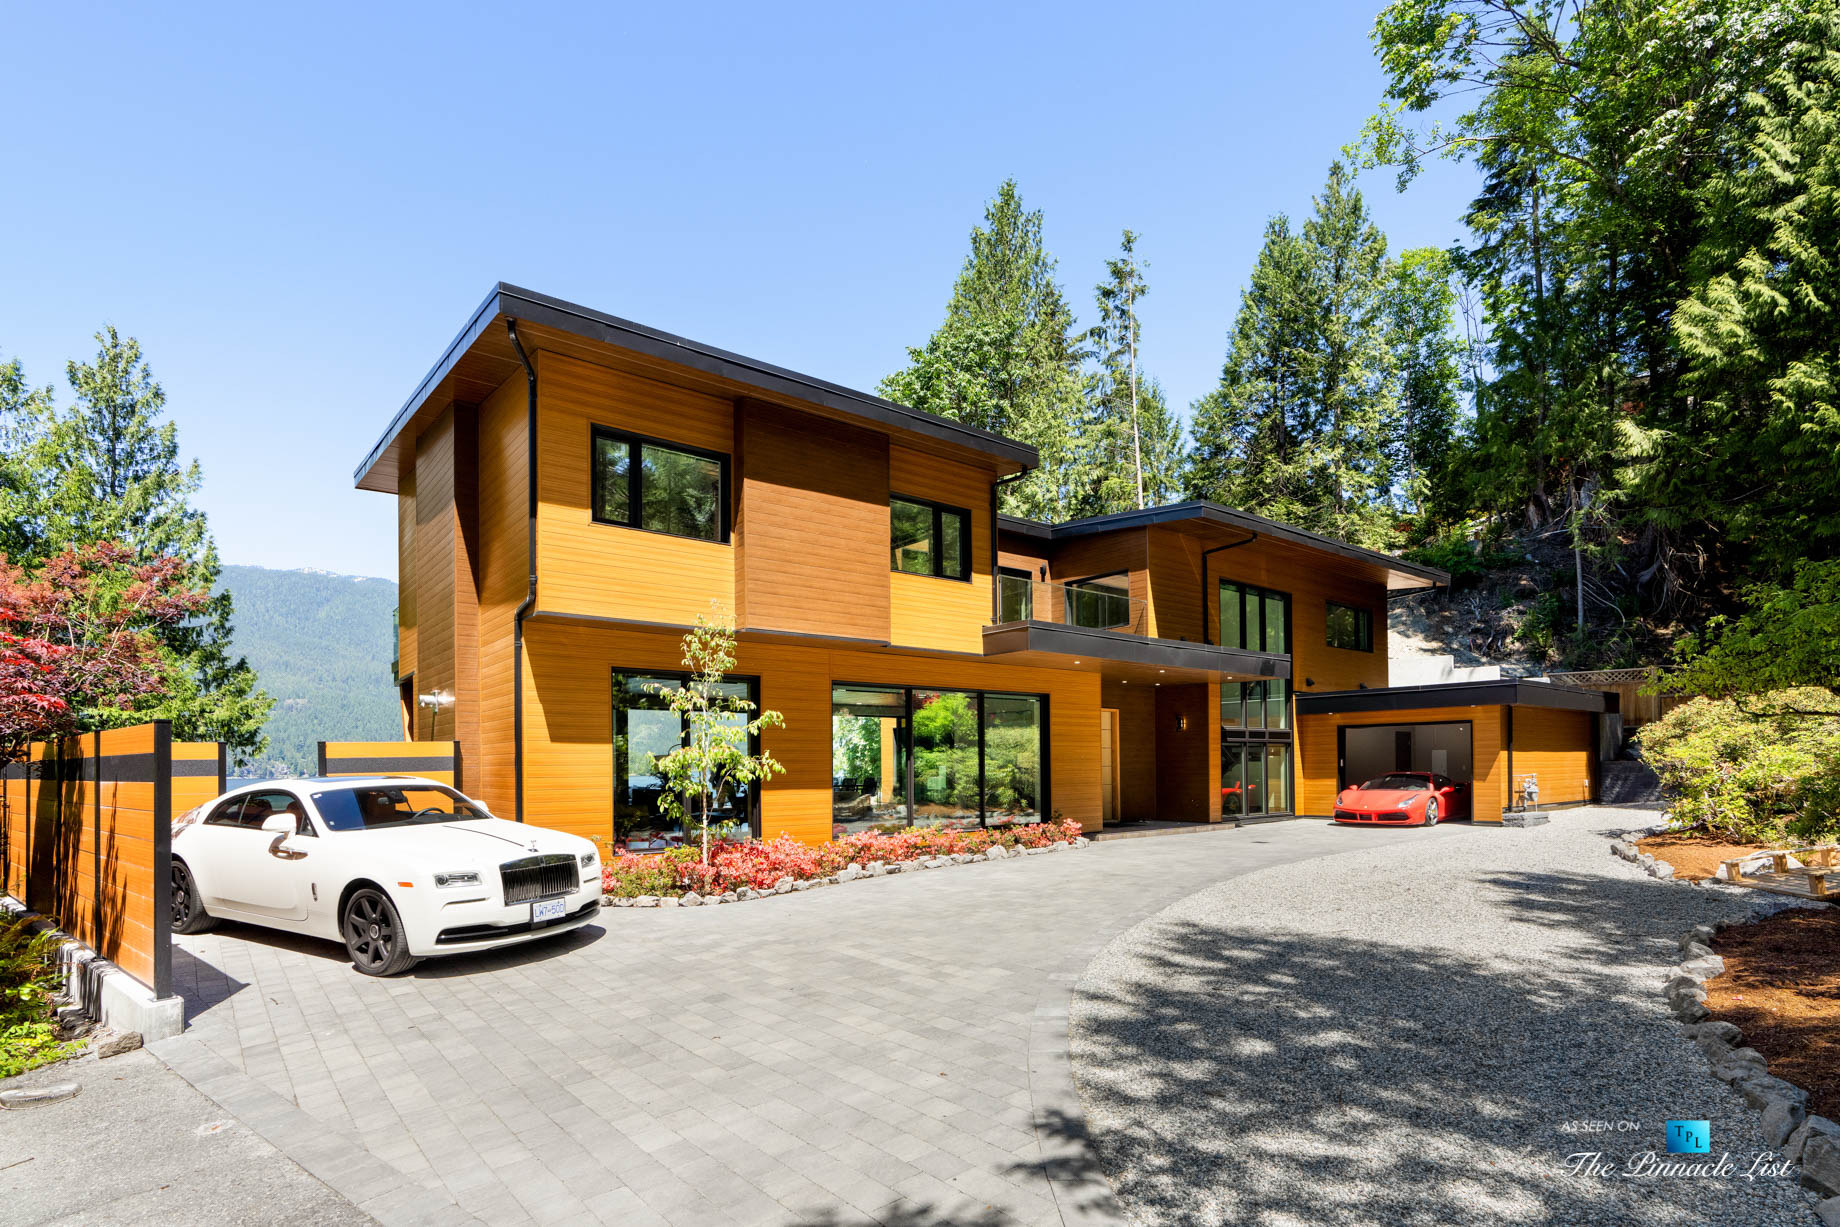 3350 Watson Rd, Belcarra, BC, Canada – Vancouver Luxury Real Estate – Modern Oceanfront Architectural Home with White Rolls-Royce and Red Ferrari